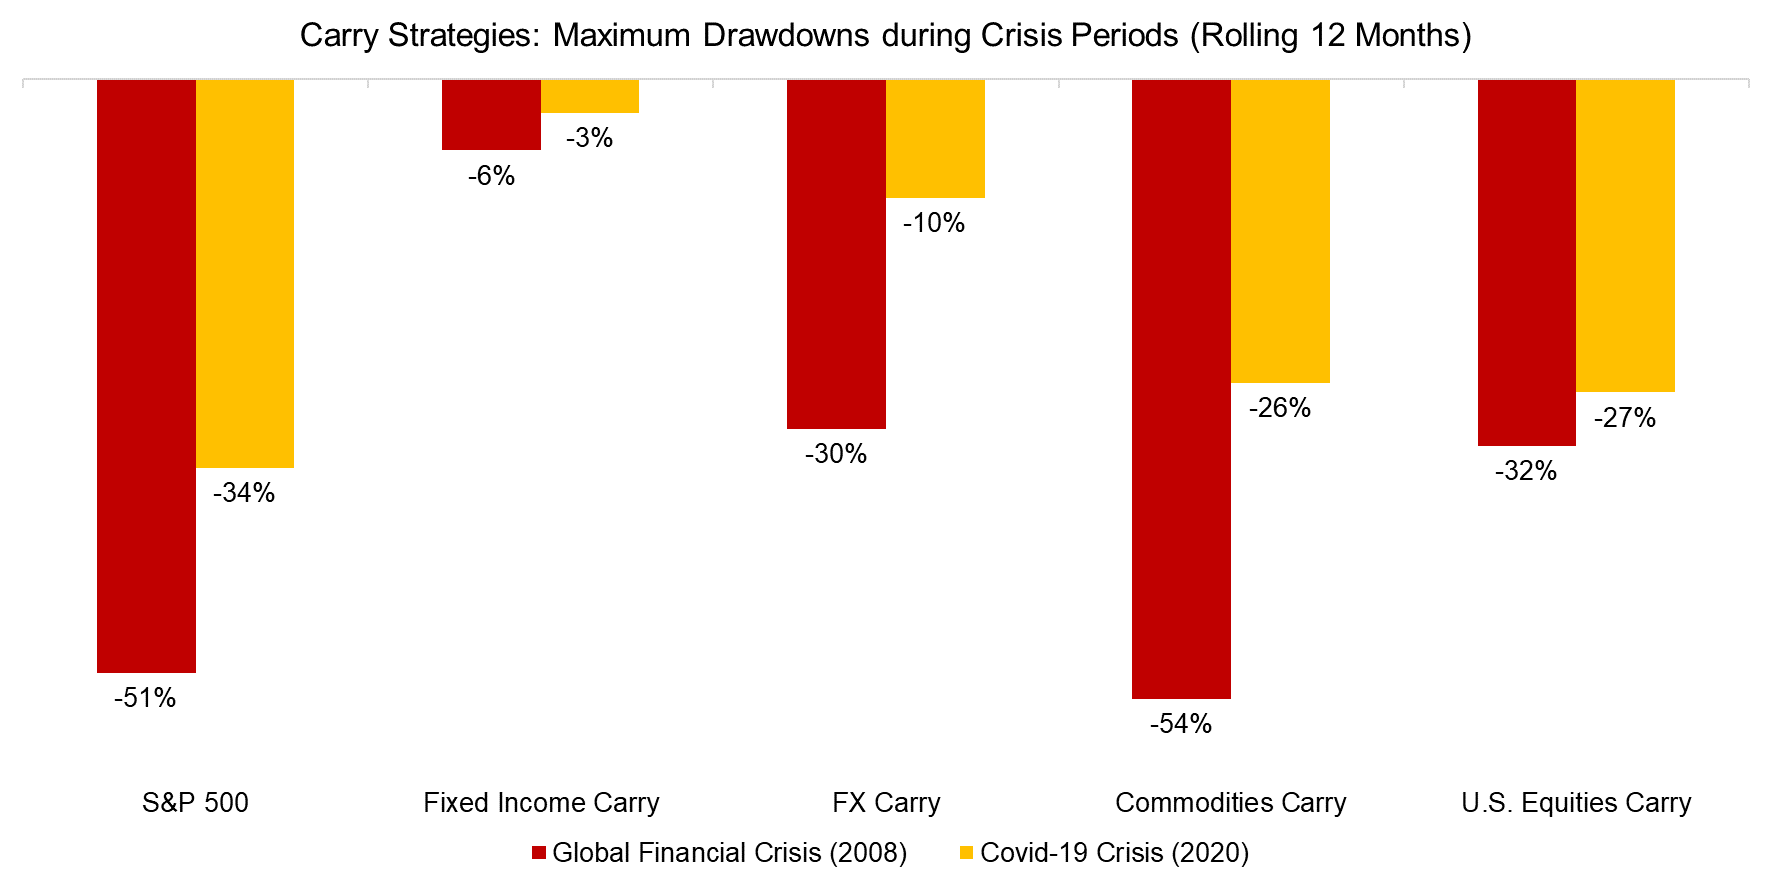 Carry Strategies Maximum Drawdowns during Crisis Periods (Rolling 12 Months)